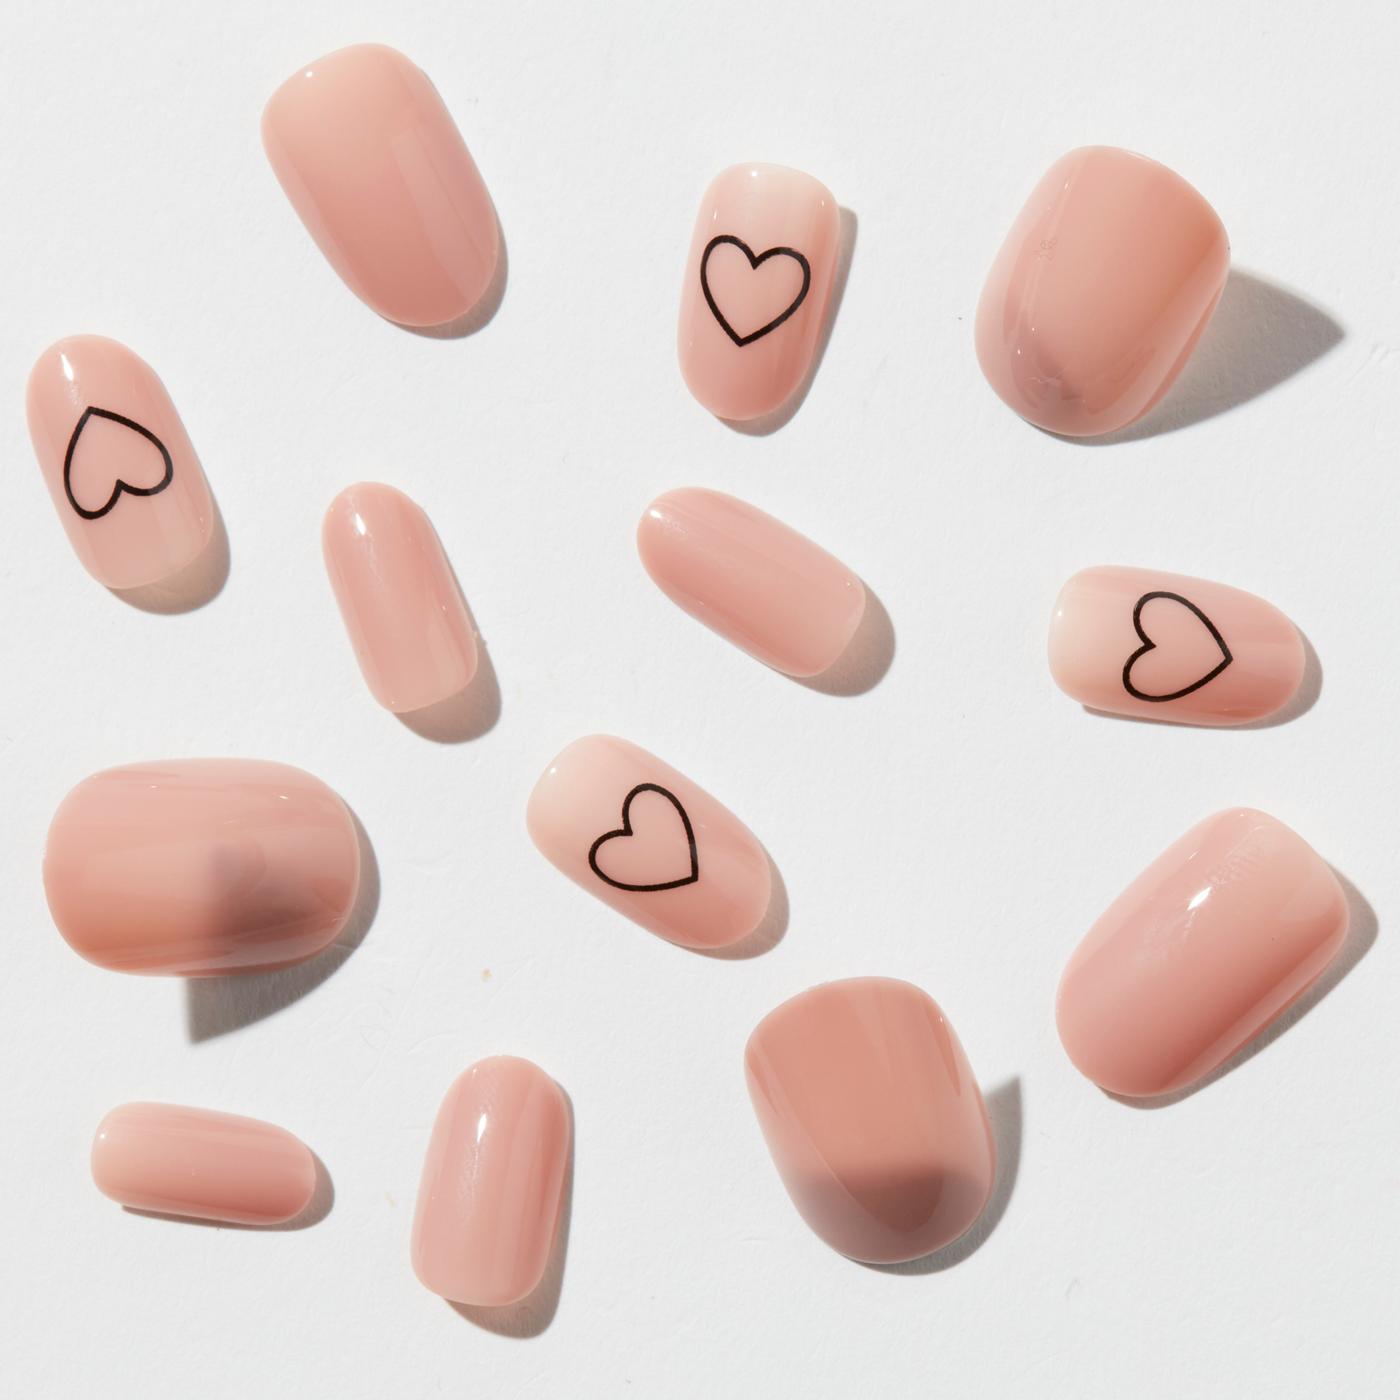 Diosa Vesta's Diary Artificial Nails - Pink Hearts; image 2 of 2